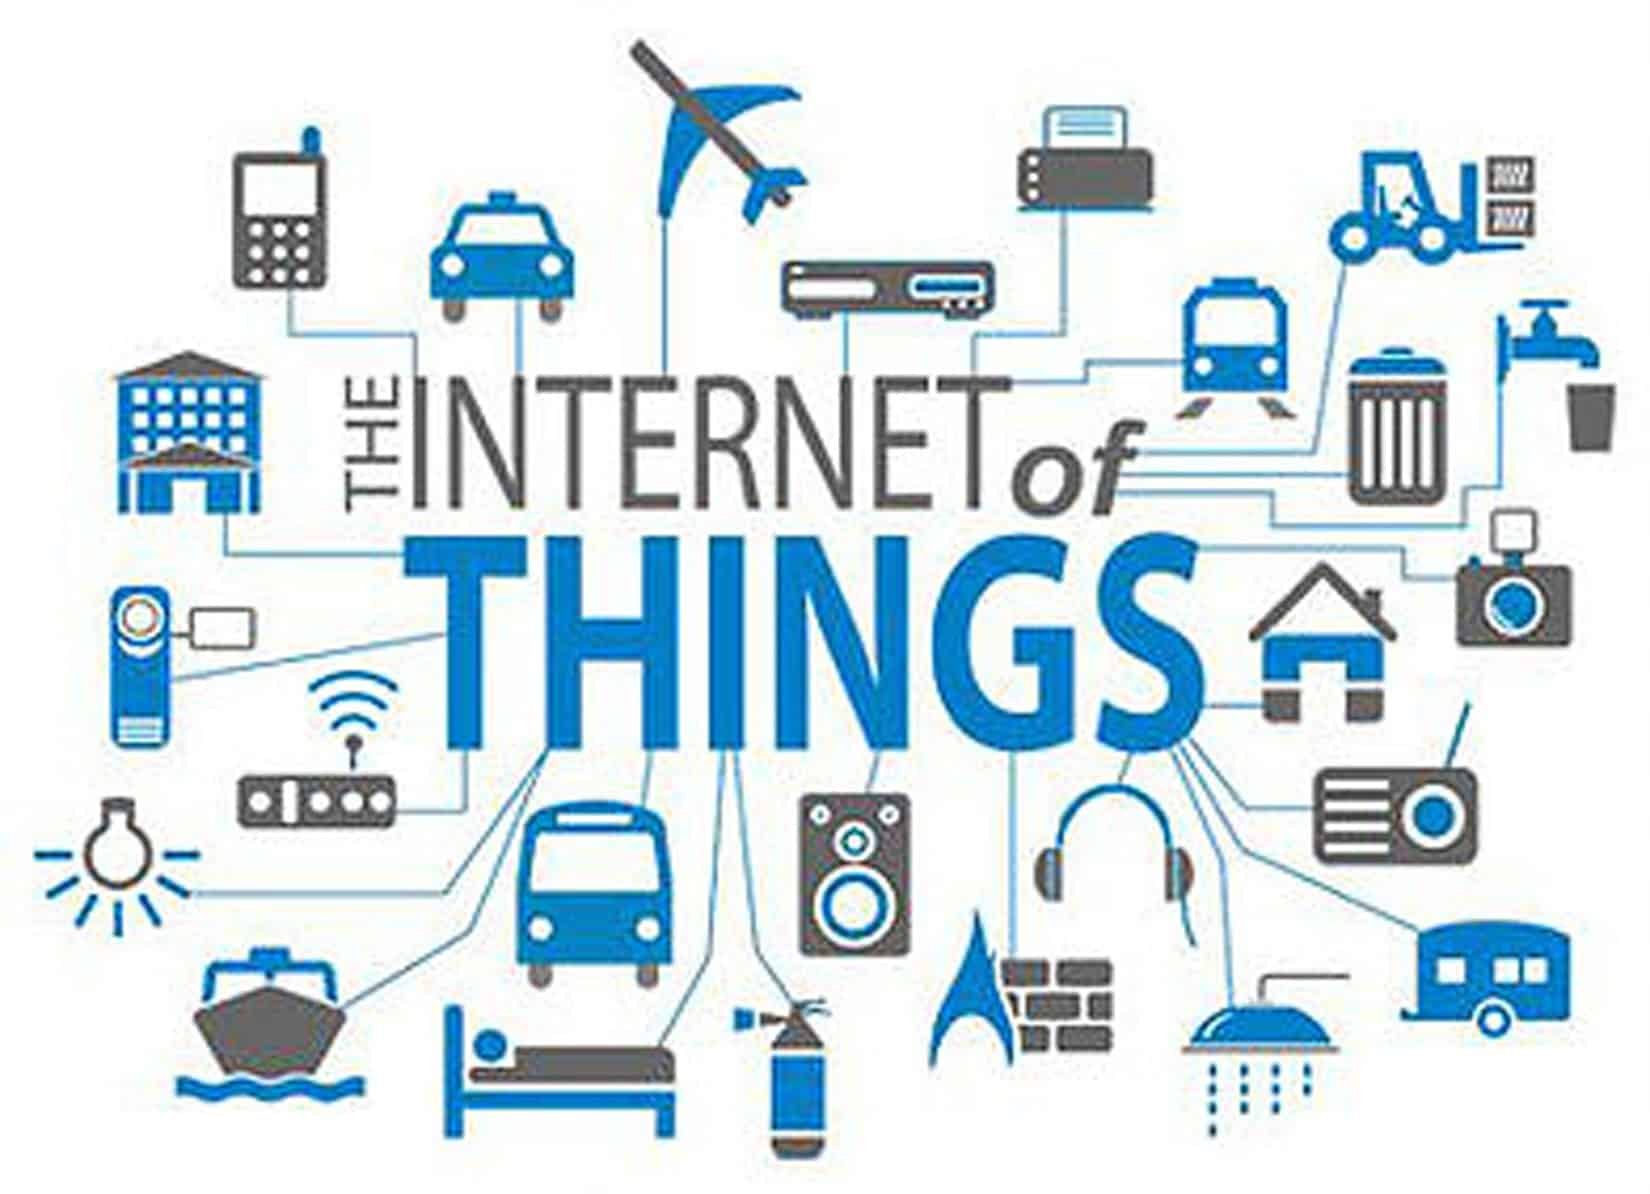 internet of things definition, internet of things definition ieee, internet of things definition english, internet of things definition kevin ashton, internet of things definition dictionary, internet of things definition pdf, internet of things definitions, internet of things definition oxford, internet of things definition simple, internet of things definition google scholar, internet of things menurut para ahli, pengertian internet of things menurut para ahli, internet of things journal, internet of things journal indonesia, internet of things journal pdf, internet of things journal papers, internet of things journal impact factor, internet of things journal springer, internet of things journal article, internet of things journals, internet of things journal elsevier, internet of things journal special issue, internet of things ppt, internet of things ppt indonesia, internet of things pptx, internet of things ppt template, internet of things ppt slides, internet of things ppt free download, internet of things ppt download, internet of things ppt template free download, internet of things ppt 2017, internet of things ppt 2018, internet of things (iot), internet of things (iot) adalah, internet of things (iot) a vision architectural elements and future directions, internet of things (iot) technologies applications challenges and solutions pdf, internet of things (iot) enabled automation in agriculture, internet of things (iot) security, internet of things (iot) a review of enabling technologies challenges and open research issues, internet of things (iot) pdf, internet of things (iot) for smart precision agriculture and farming in rural areas, internet of things (iot) enabled water monitoring system, internet of things contoh, internet of things dan contohnya, contoh internet of things adalah, contoh internet of things di indonesia, pengertian internet of things dan contohnya, contoh internet of things sederhana, contoh internet of things untuk pendidikan, contoh aplikasi internet of things, contoh implementasi internet of things, contoh jurnal internet of things, internet of things artinya, internet of things pdf, internet of things pdf indonesia, internet of things pdf book, internet of things pdf 2018, internet of things pdf 2017, internet of things pdf free download, internet of things pdf journal, internet of things pdf books, internet of things pdf ieee, internet of things pdf research paper, internet of things adalah, internet of things adalah pdf, internet of things adalah jurnal, contoh internet of things adalah, that internet of things thing, internet of things, internet of things adalah, internet of things pdf, internet of things artinya, internet of things contoh, internet of things (iot), internet of things ppt, internet of things journal, internet of things menurut para ahli, internet of things definition,